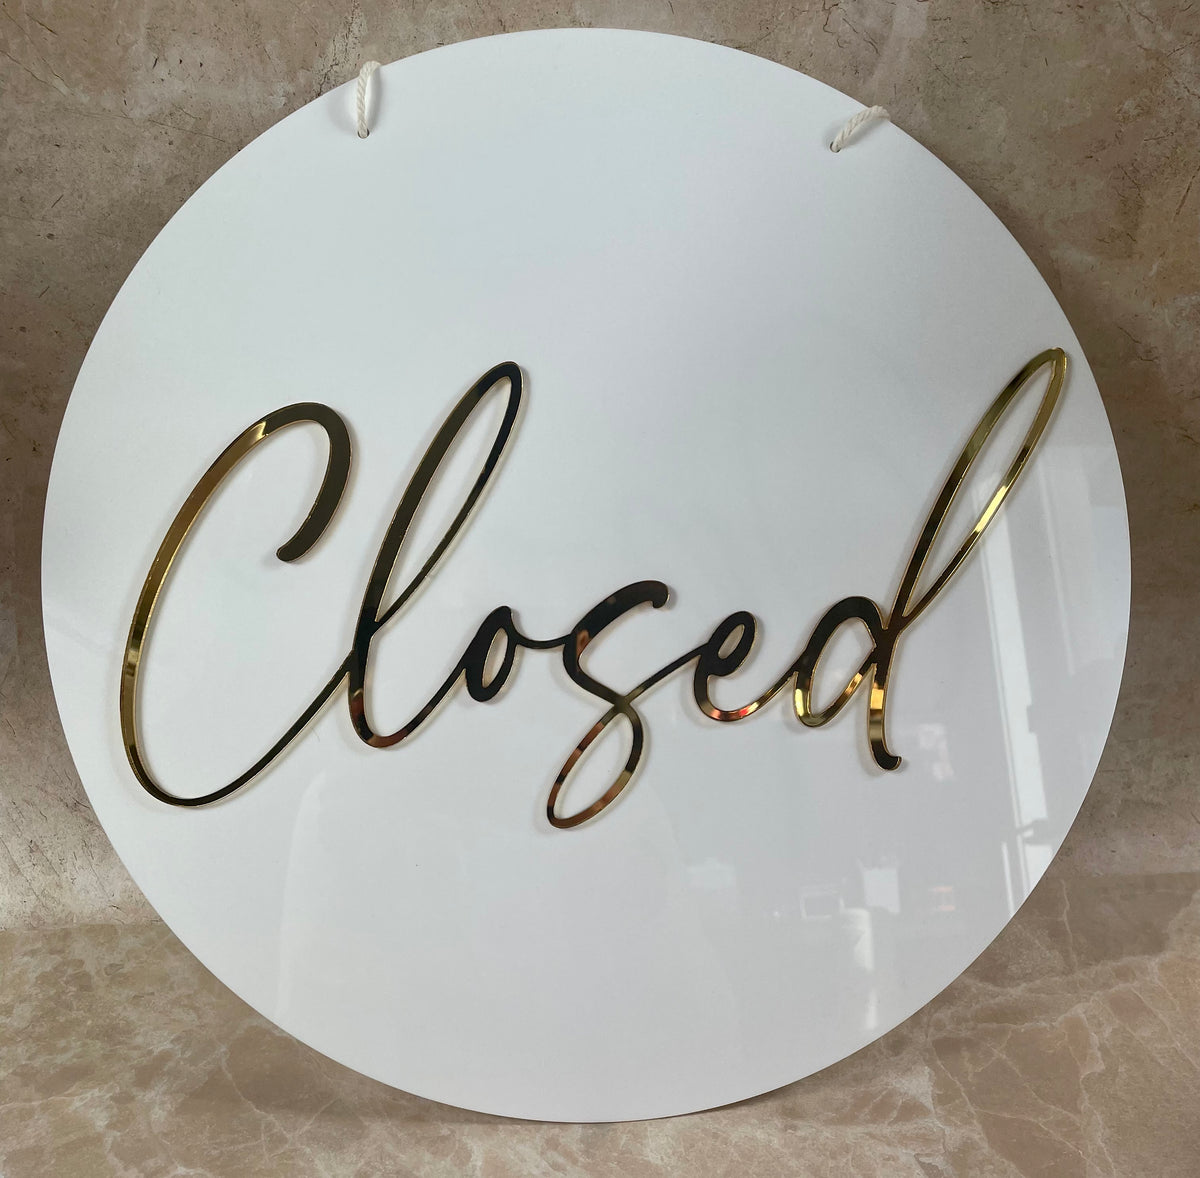  closed signs